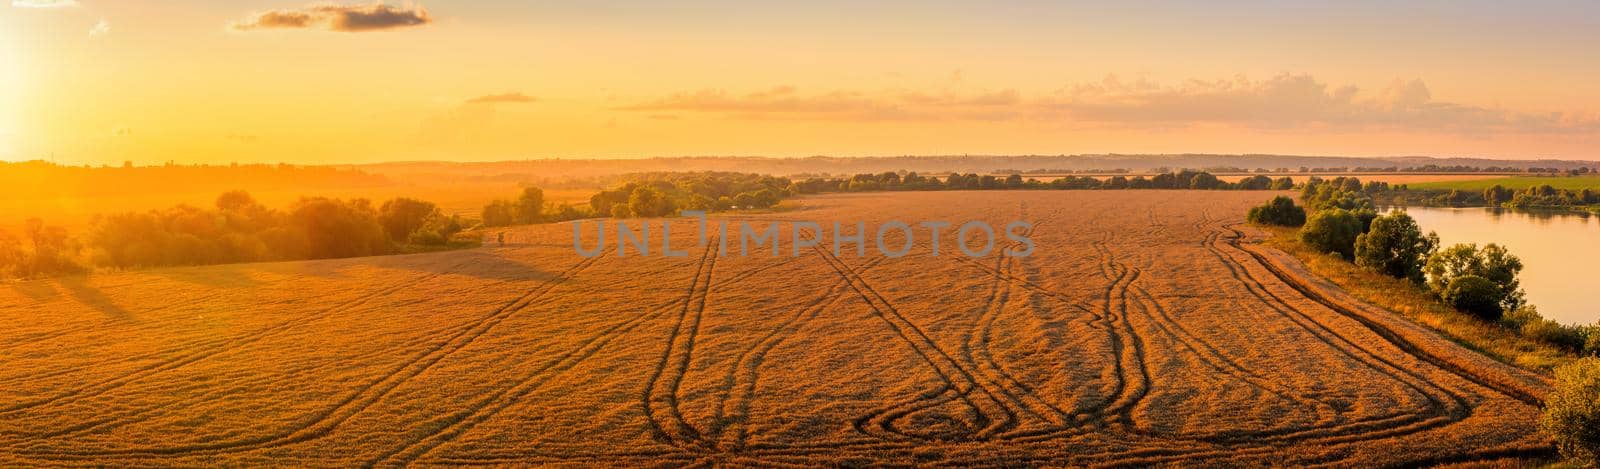 Top view of a sunset or sunrise in an agricultural field with ears of young golden rye. Rural panorama. by Eugene_Yemelyanov